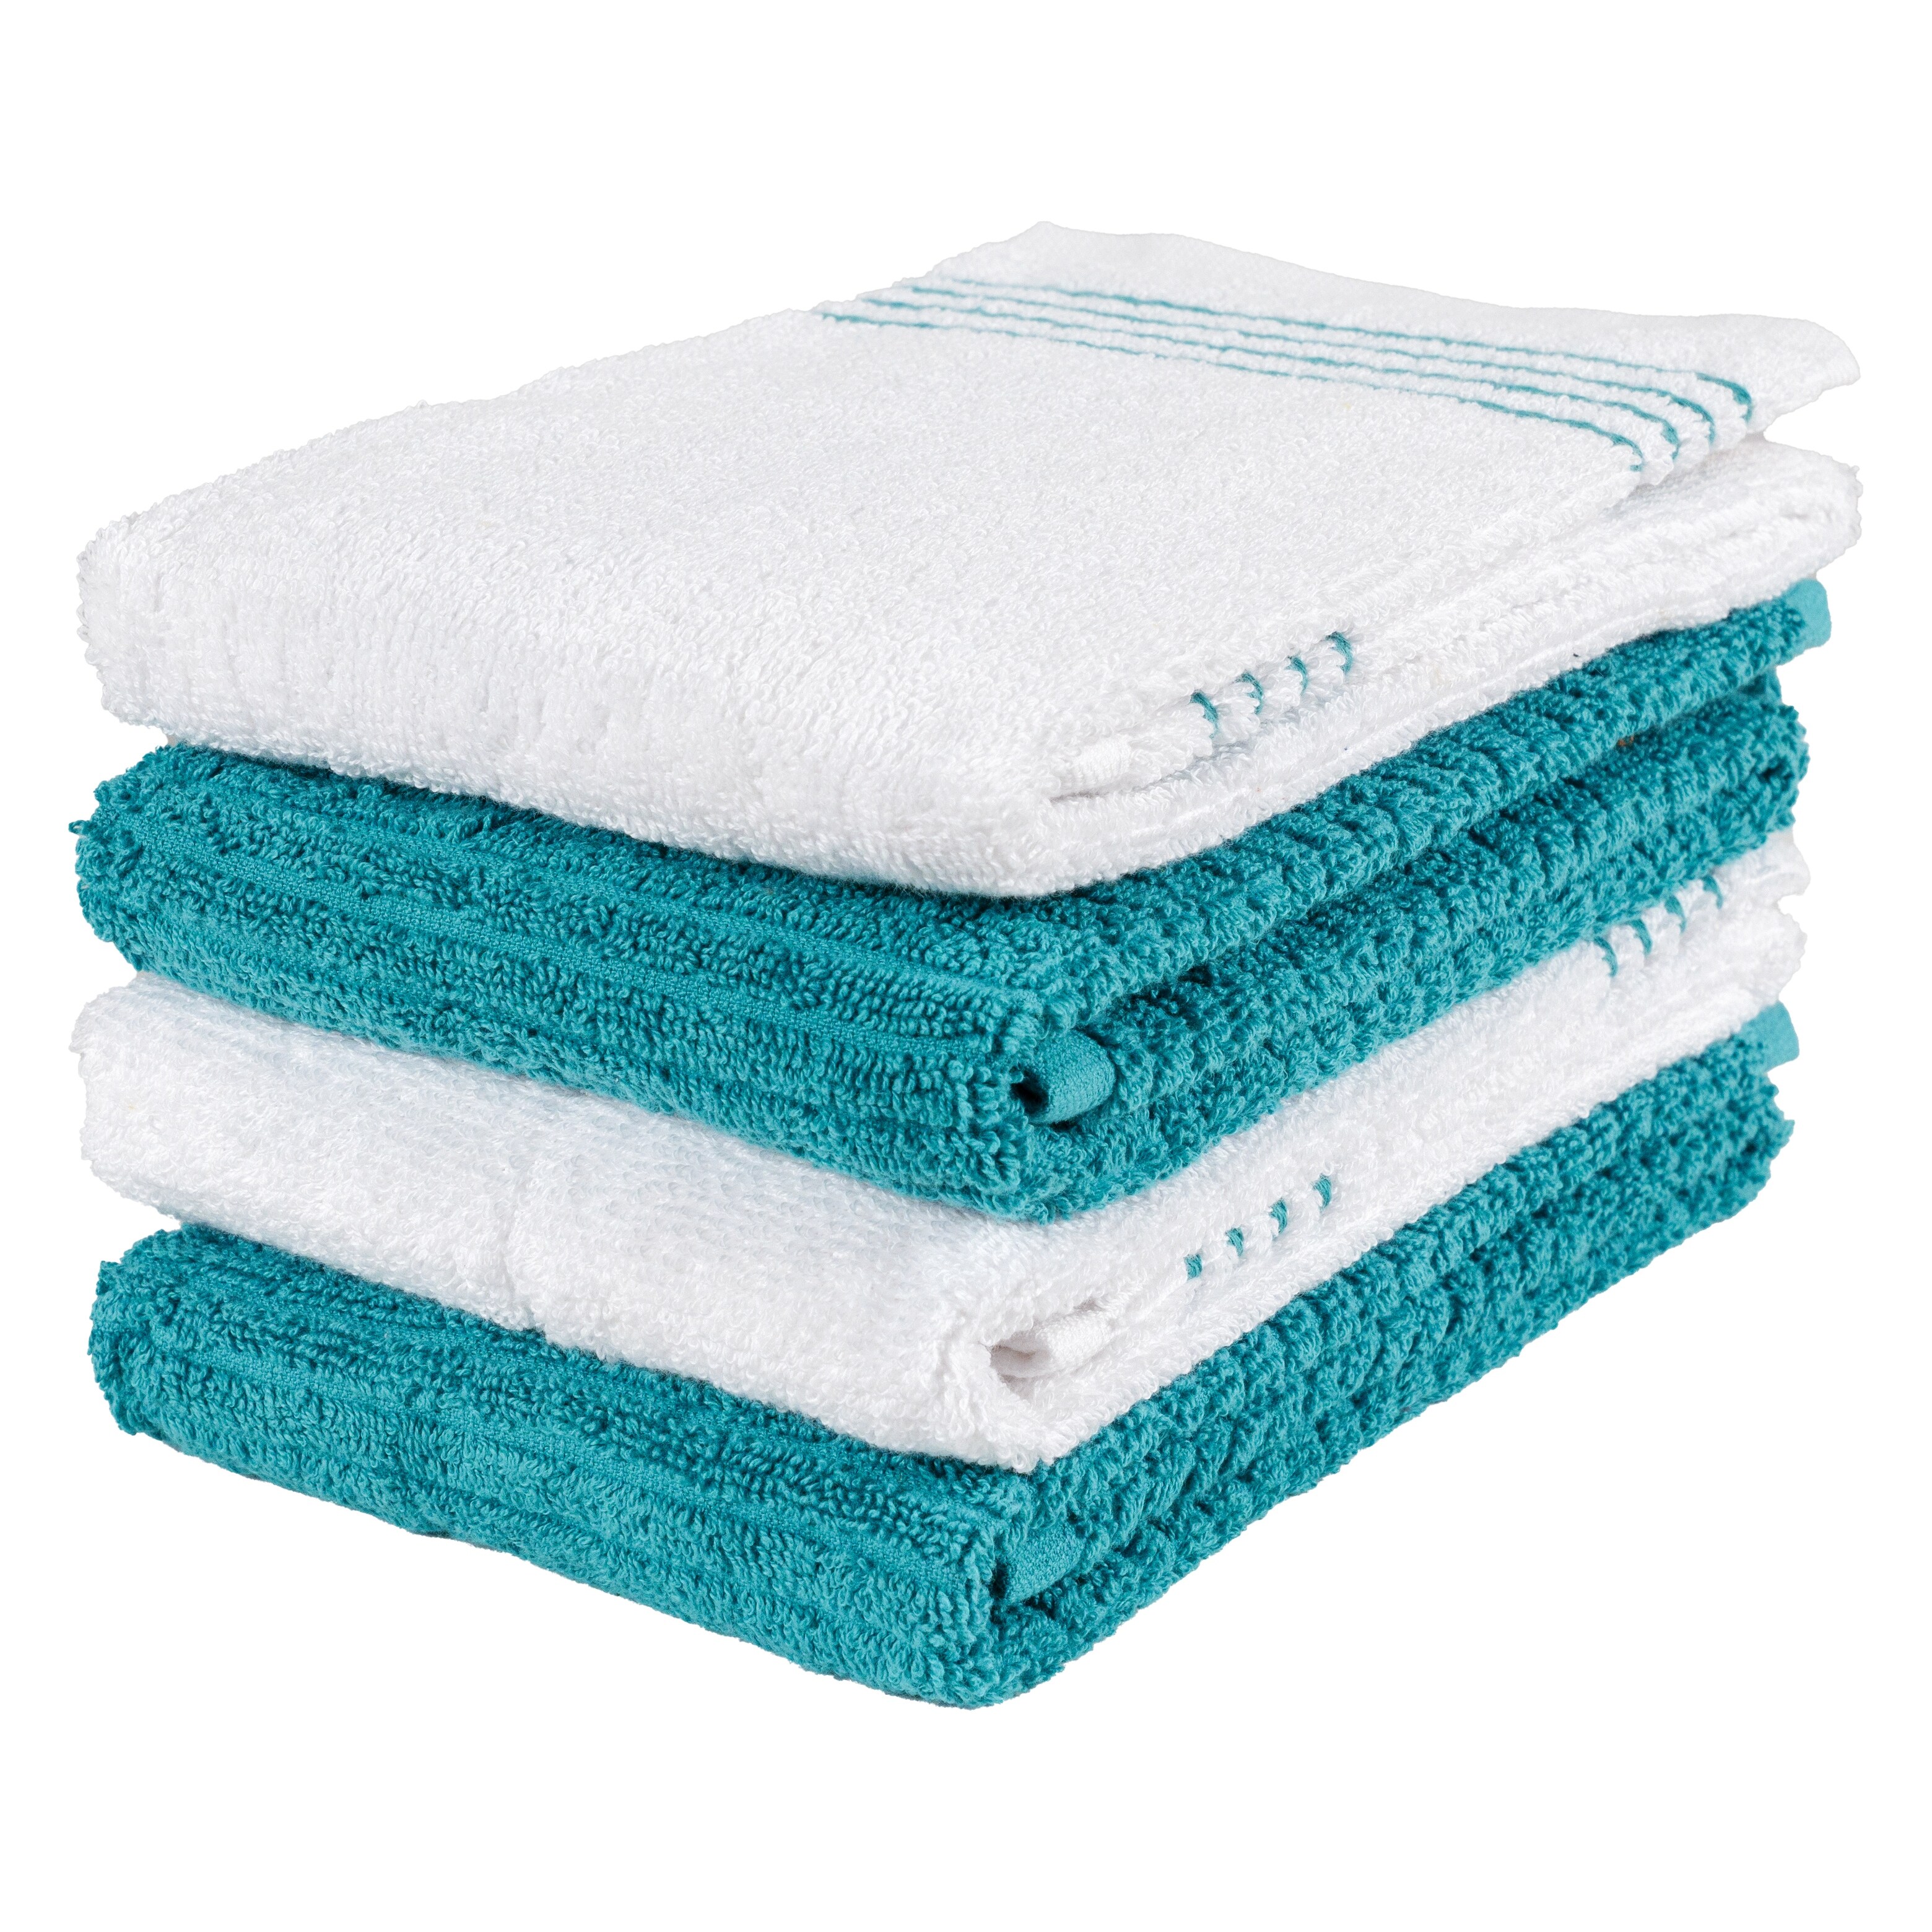 https://ak1.ostkcdn.com/images/products/is/images/direct/64ee3388ba4e9dac8f6a699f8a3baf7c4e0e1610/Davenport-Terry-Kitchen-Towels%2C-Set-of-4.jpg